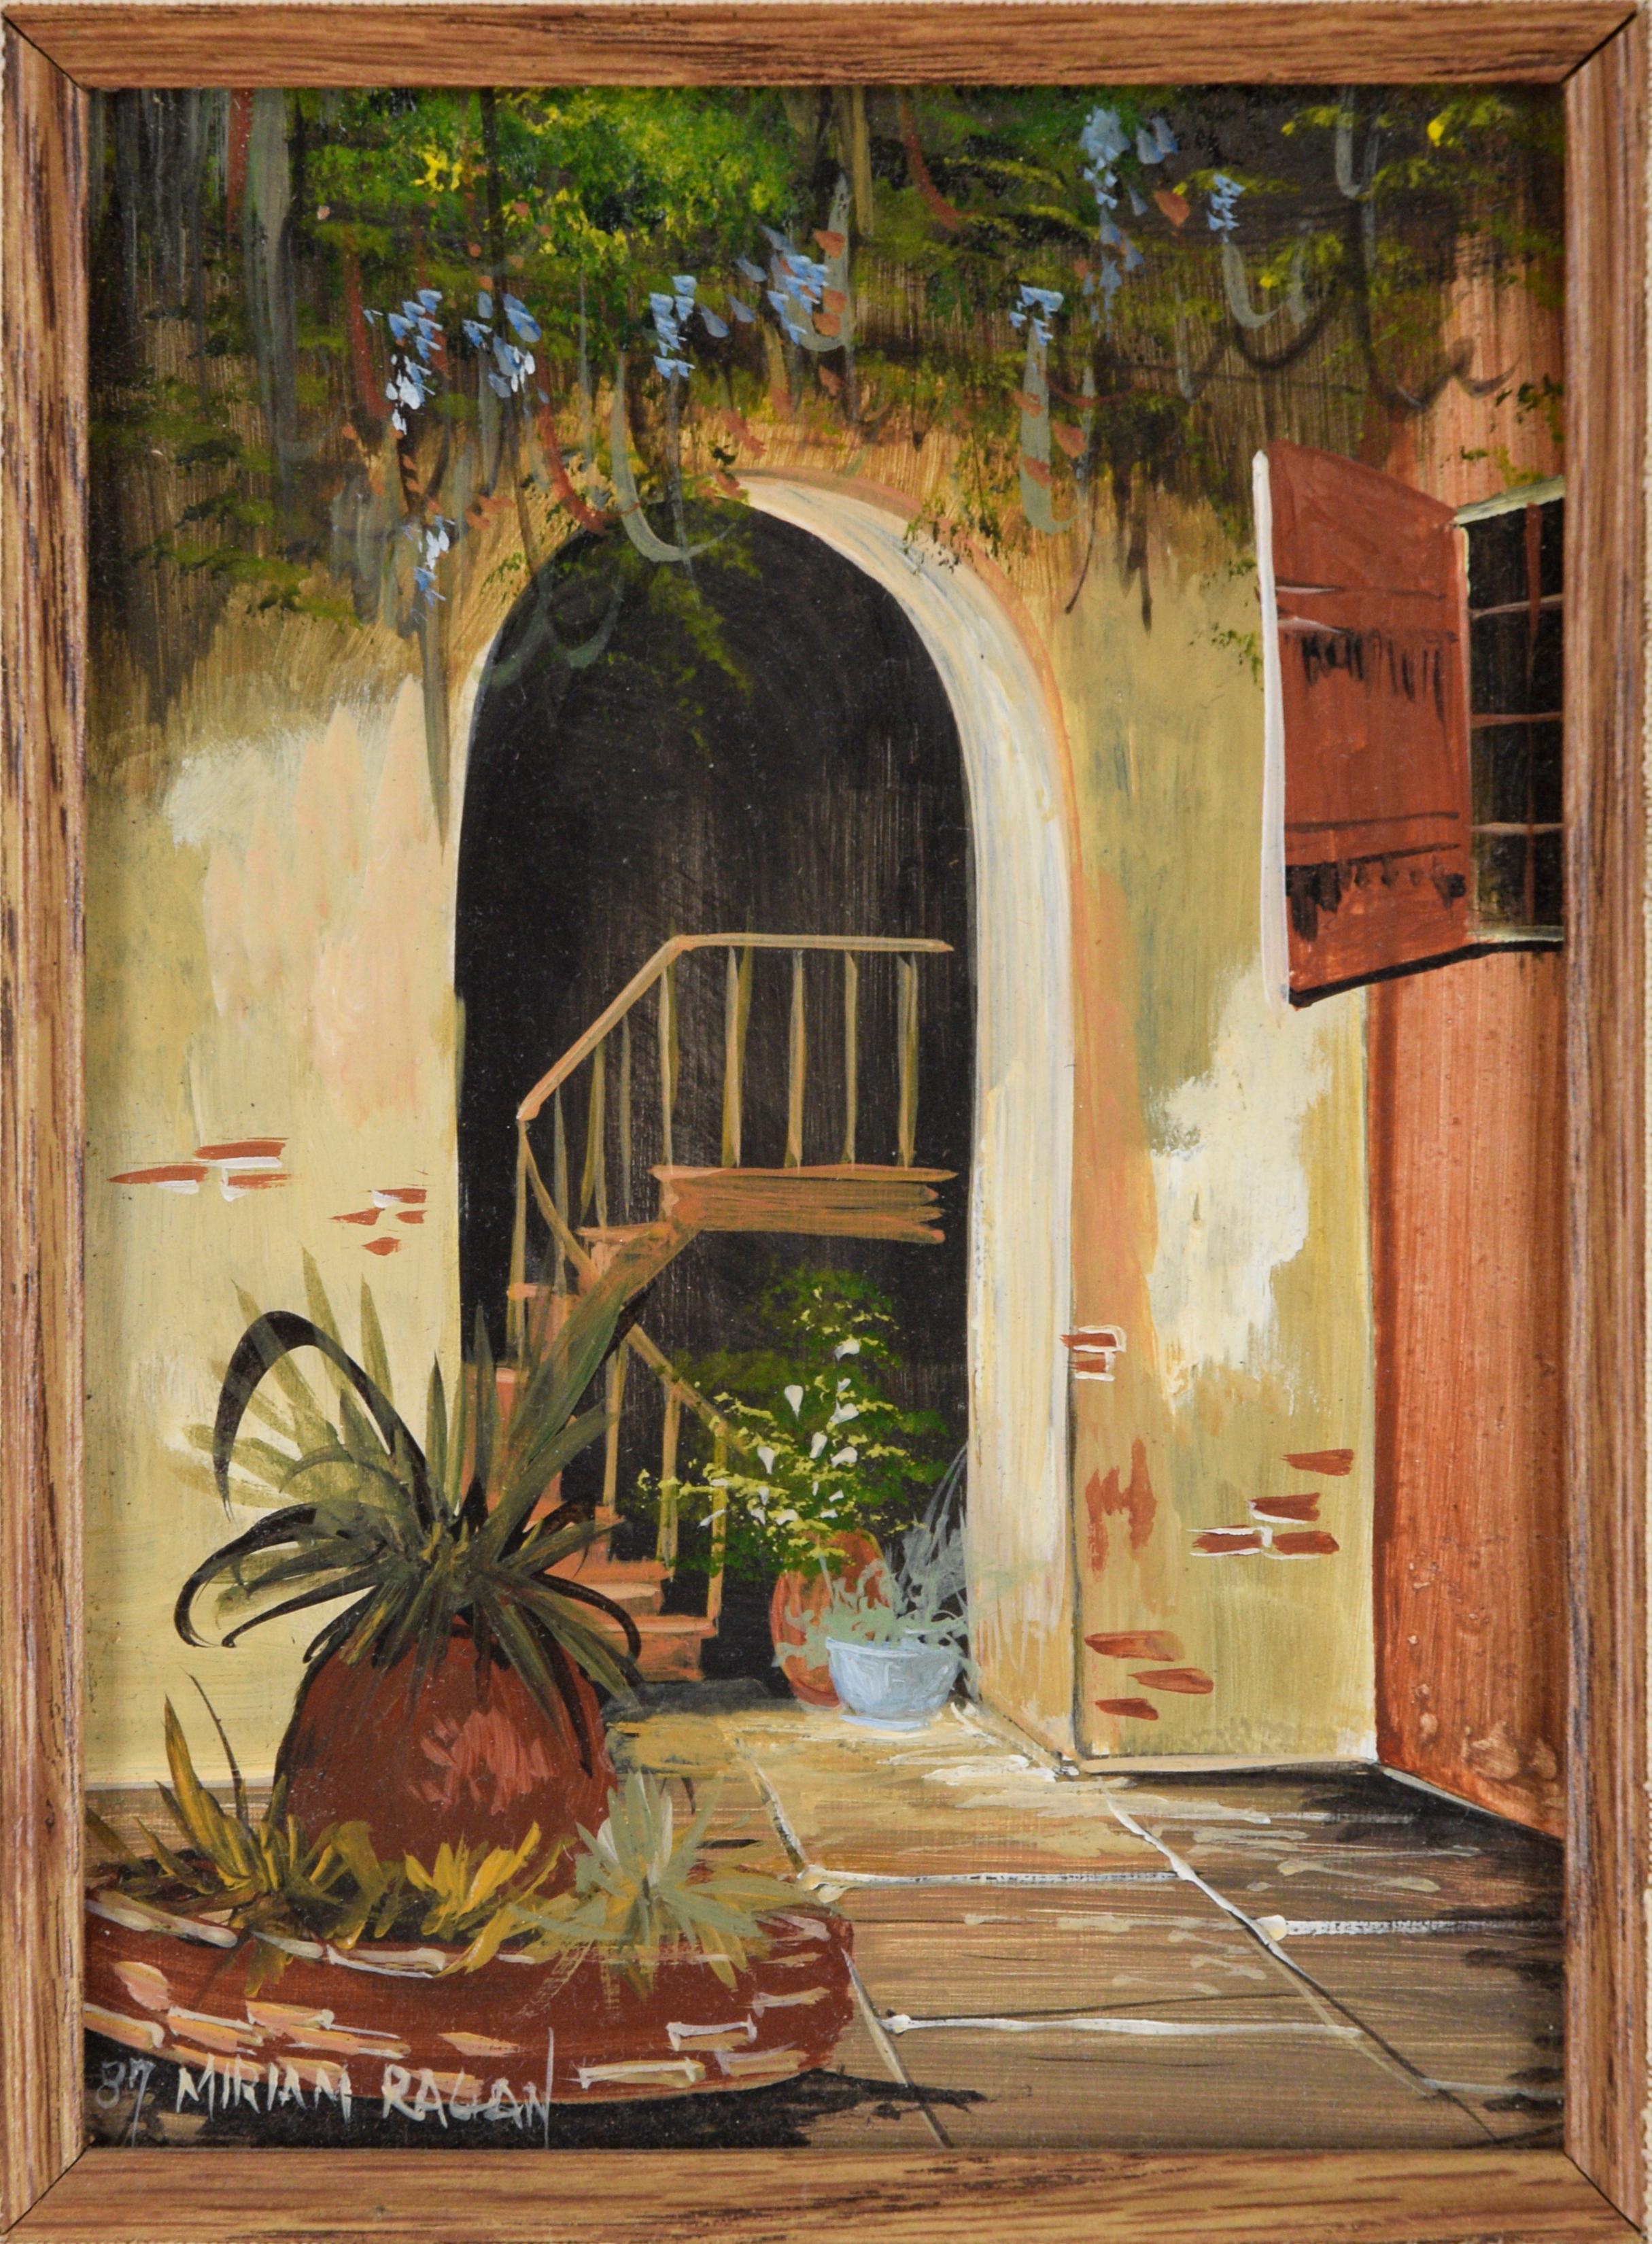 The Staircase - The French Quarter - New Orleans Original Oil on Masonite - Painting by Miriam Ragan